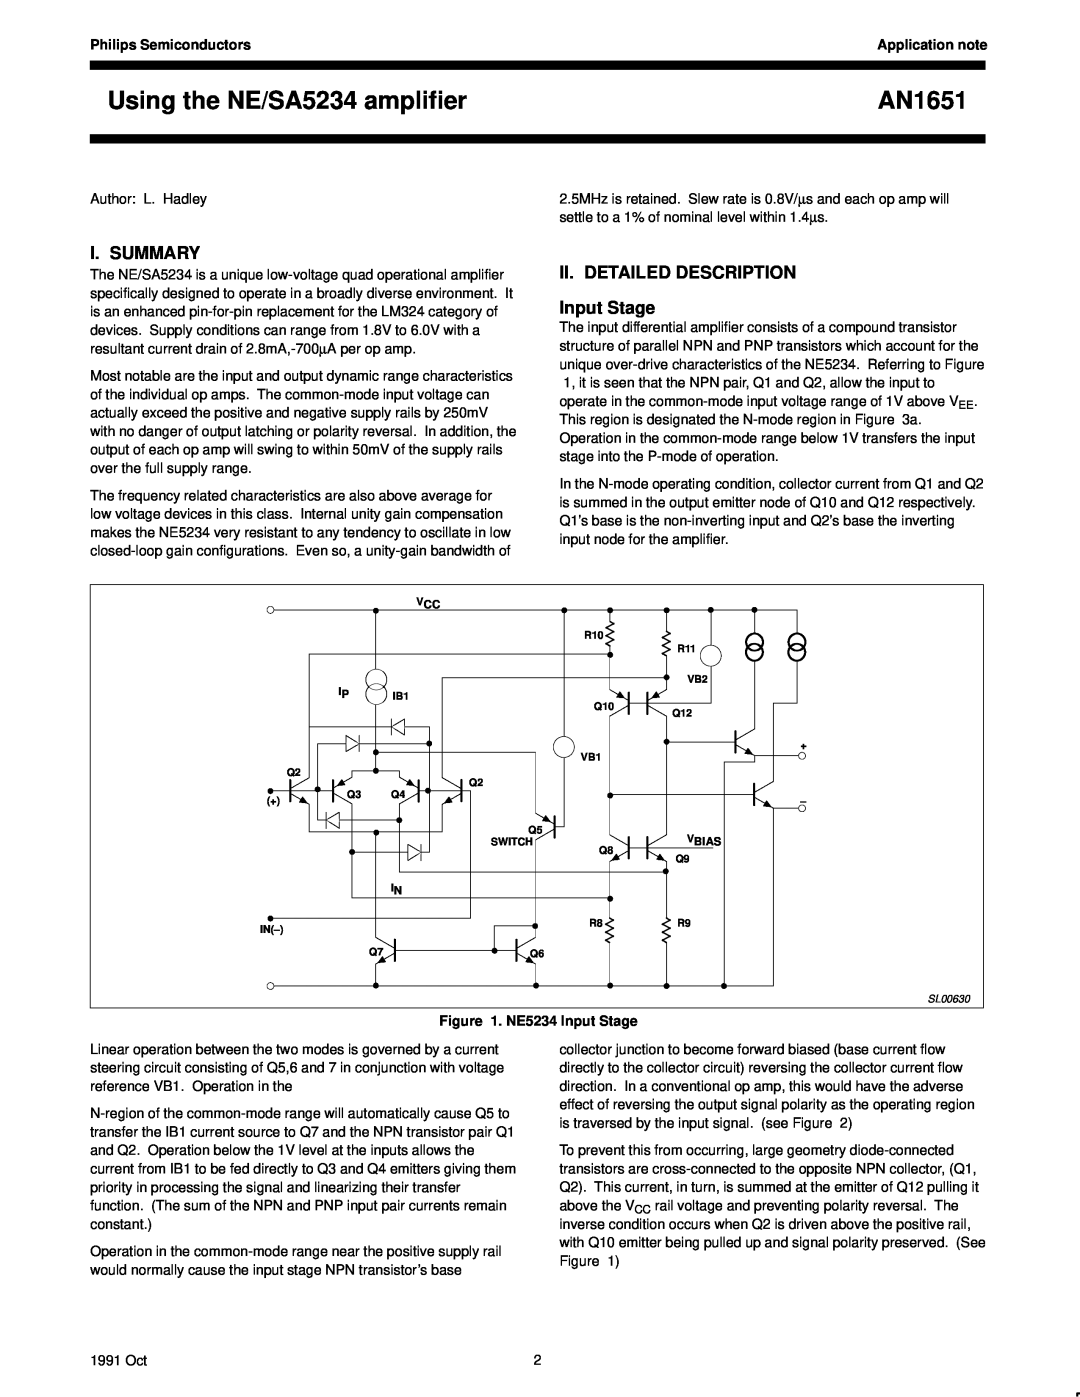 Philips AN1651 manual I. Summary, II. DETAILED DESCRIPTION Input Stage, Philips Semiconductors, NE5234 Input Stage 